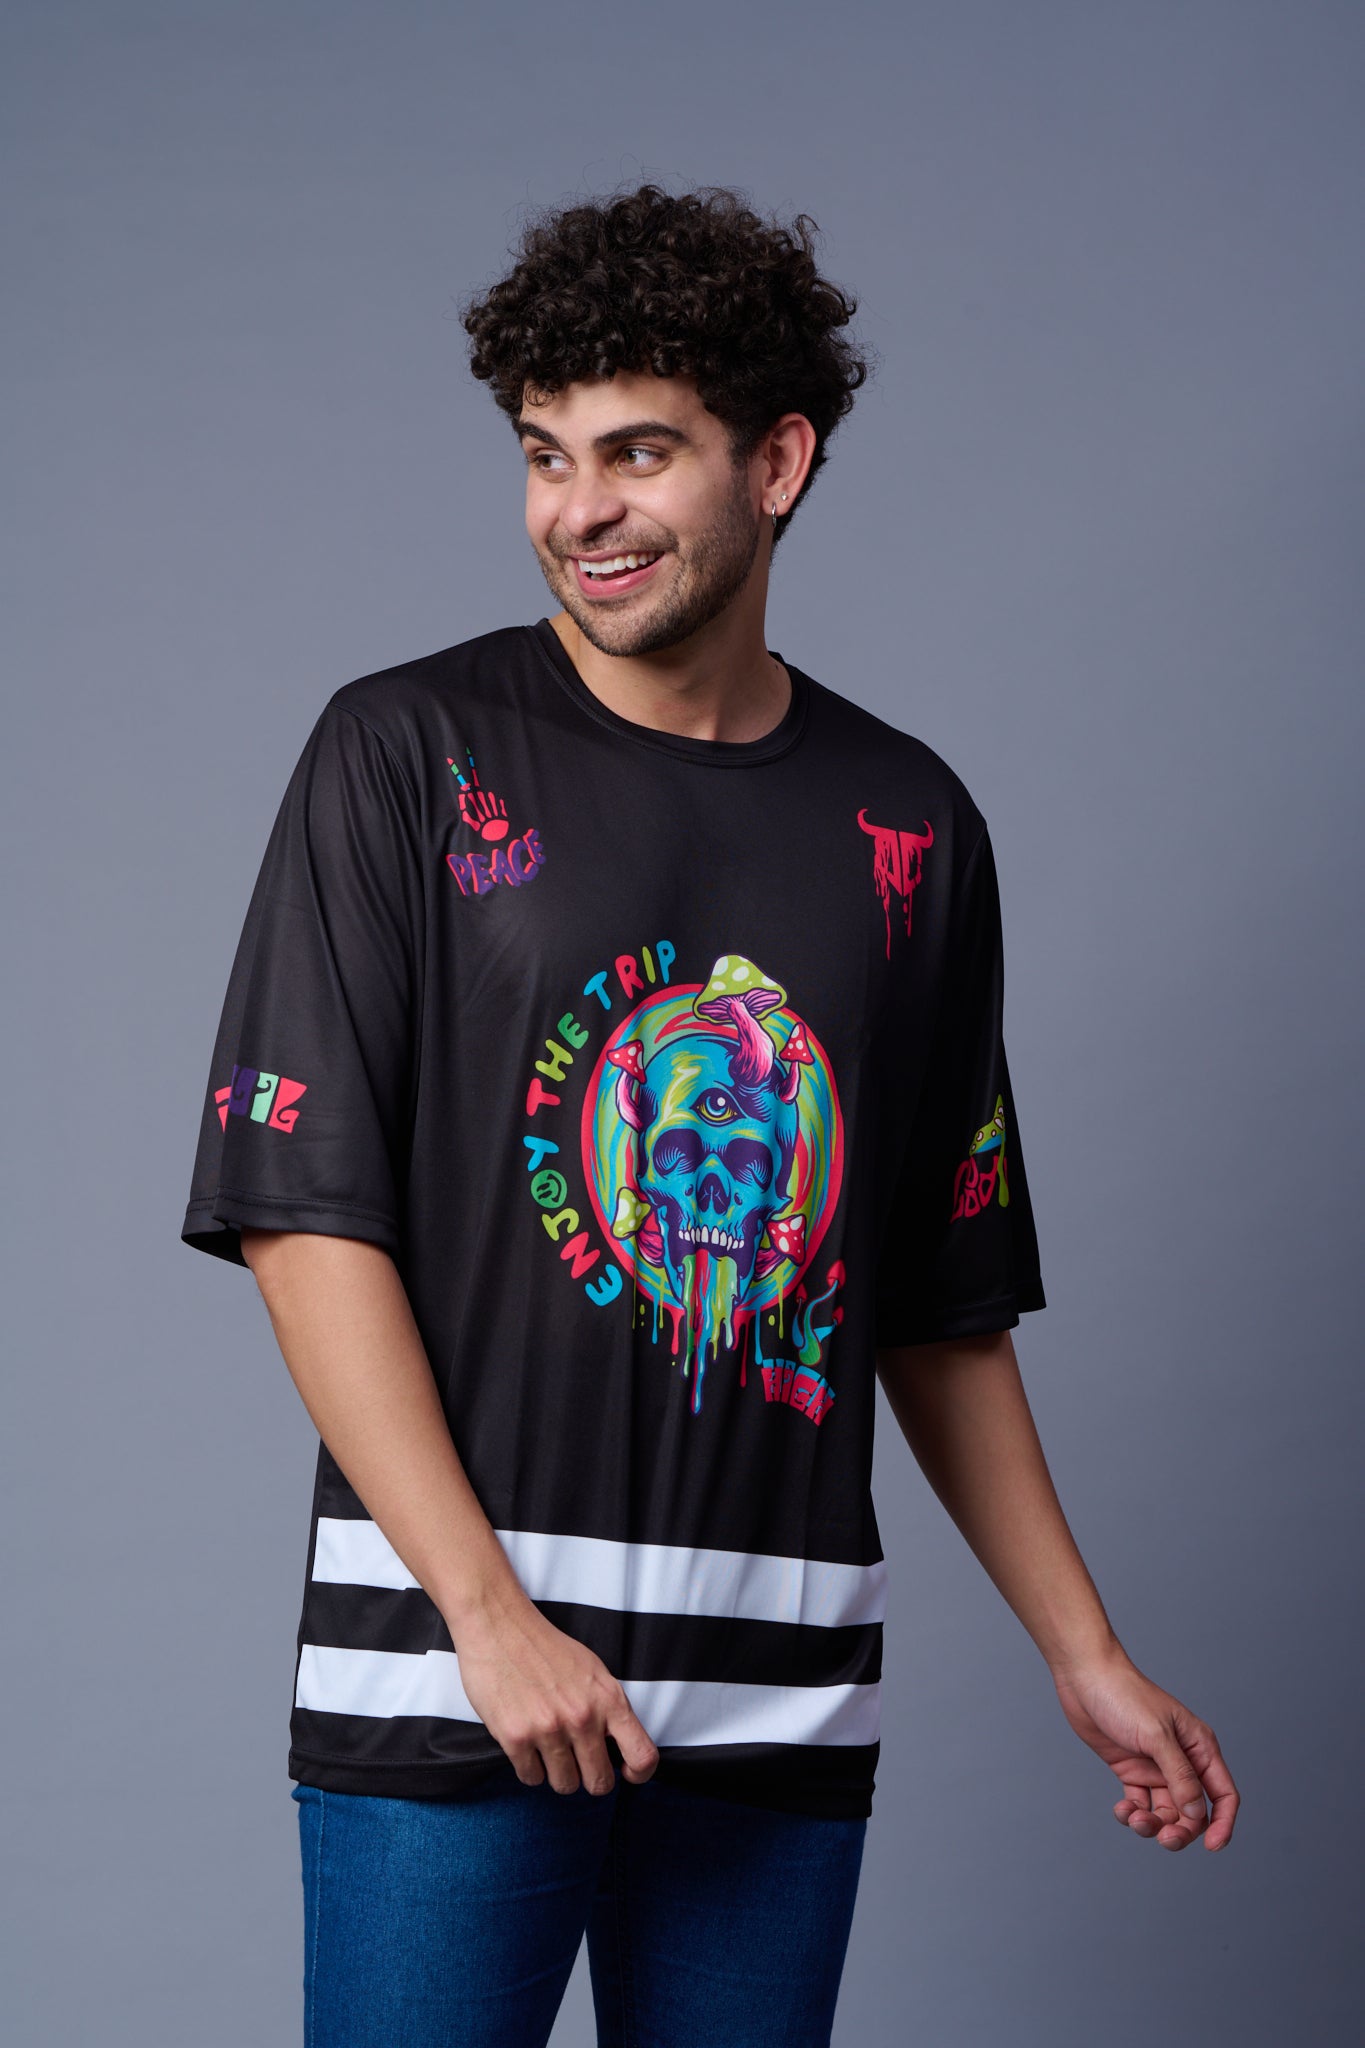 Skull With Enjoy The Trip Printed Black  Oversized  Jersey T-Shirt for Men